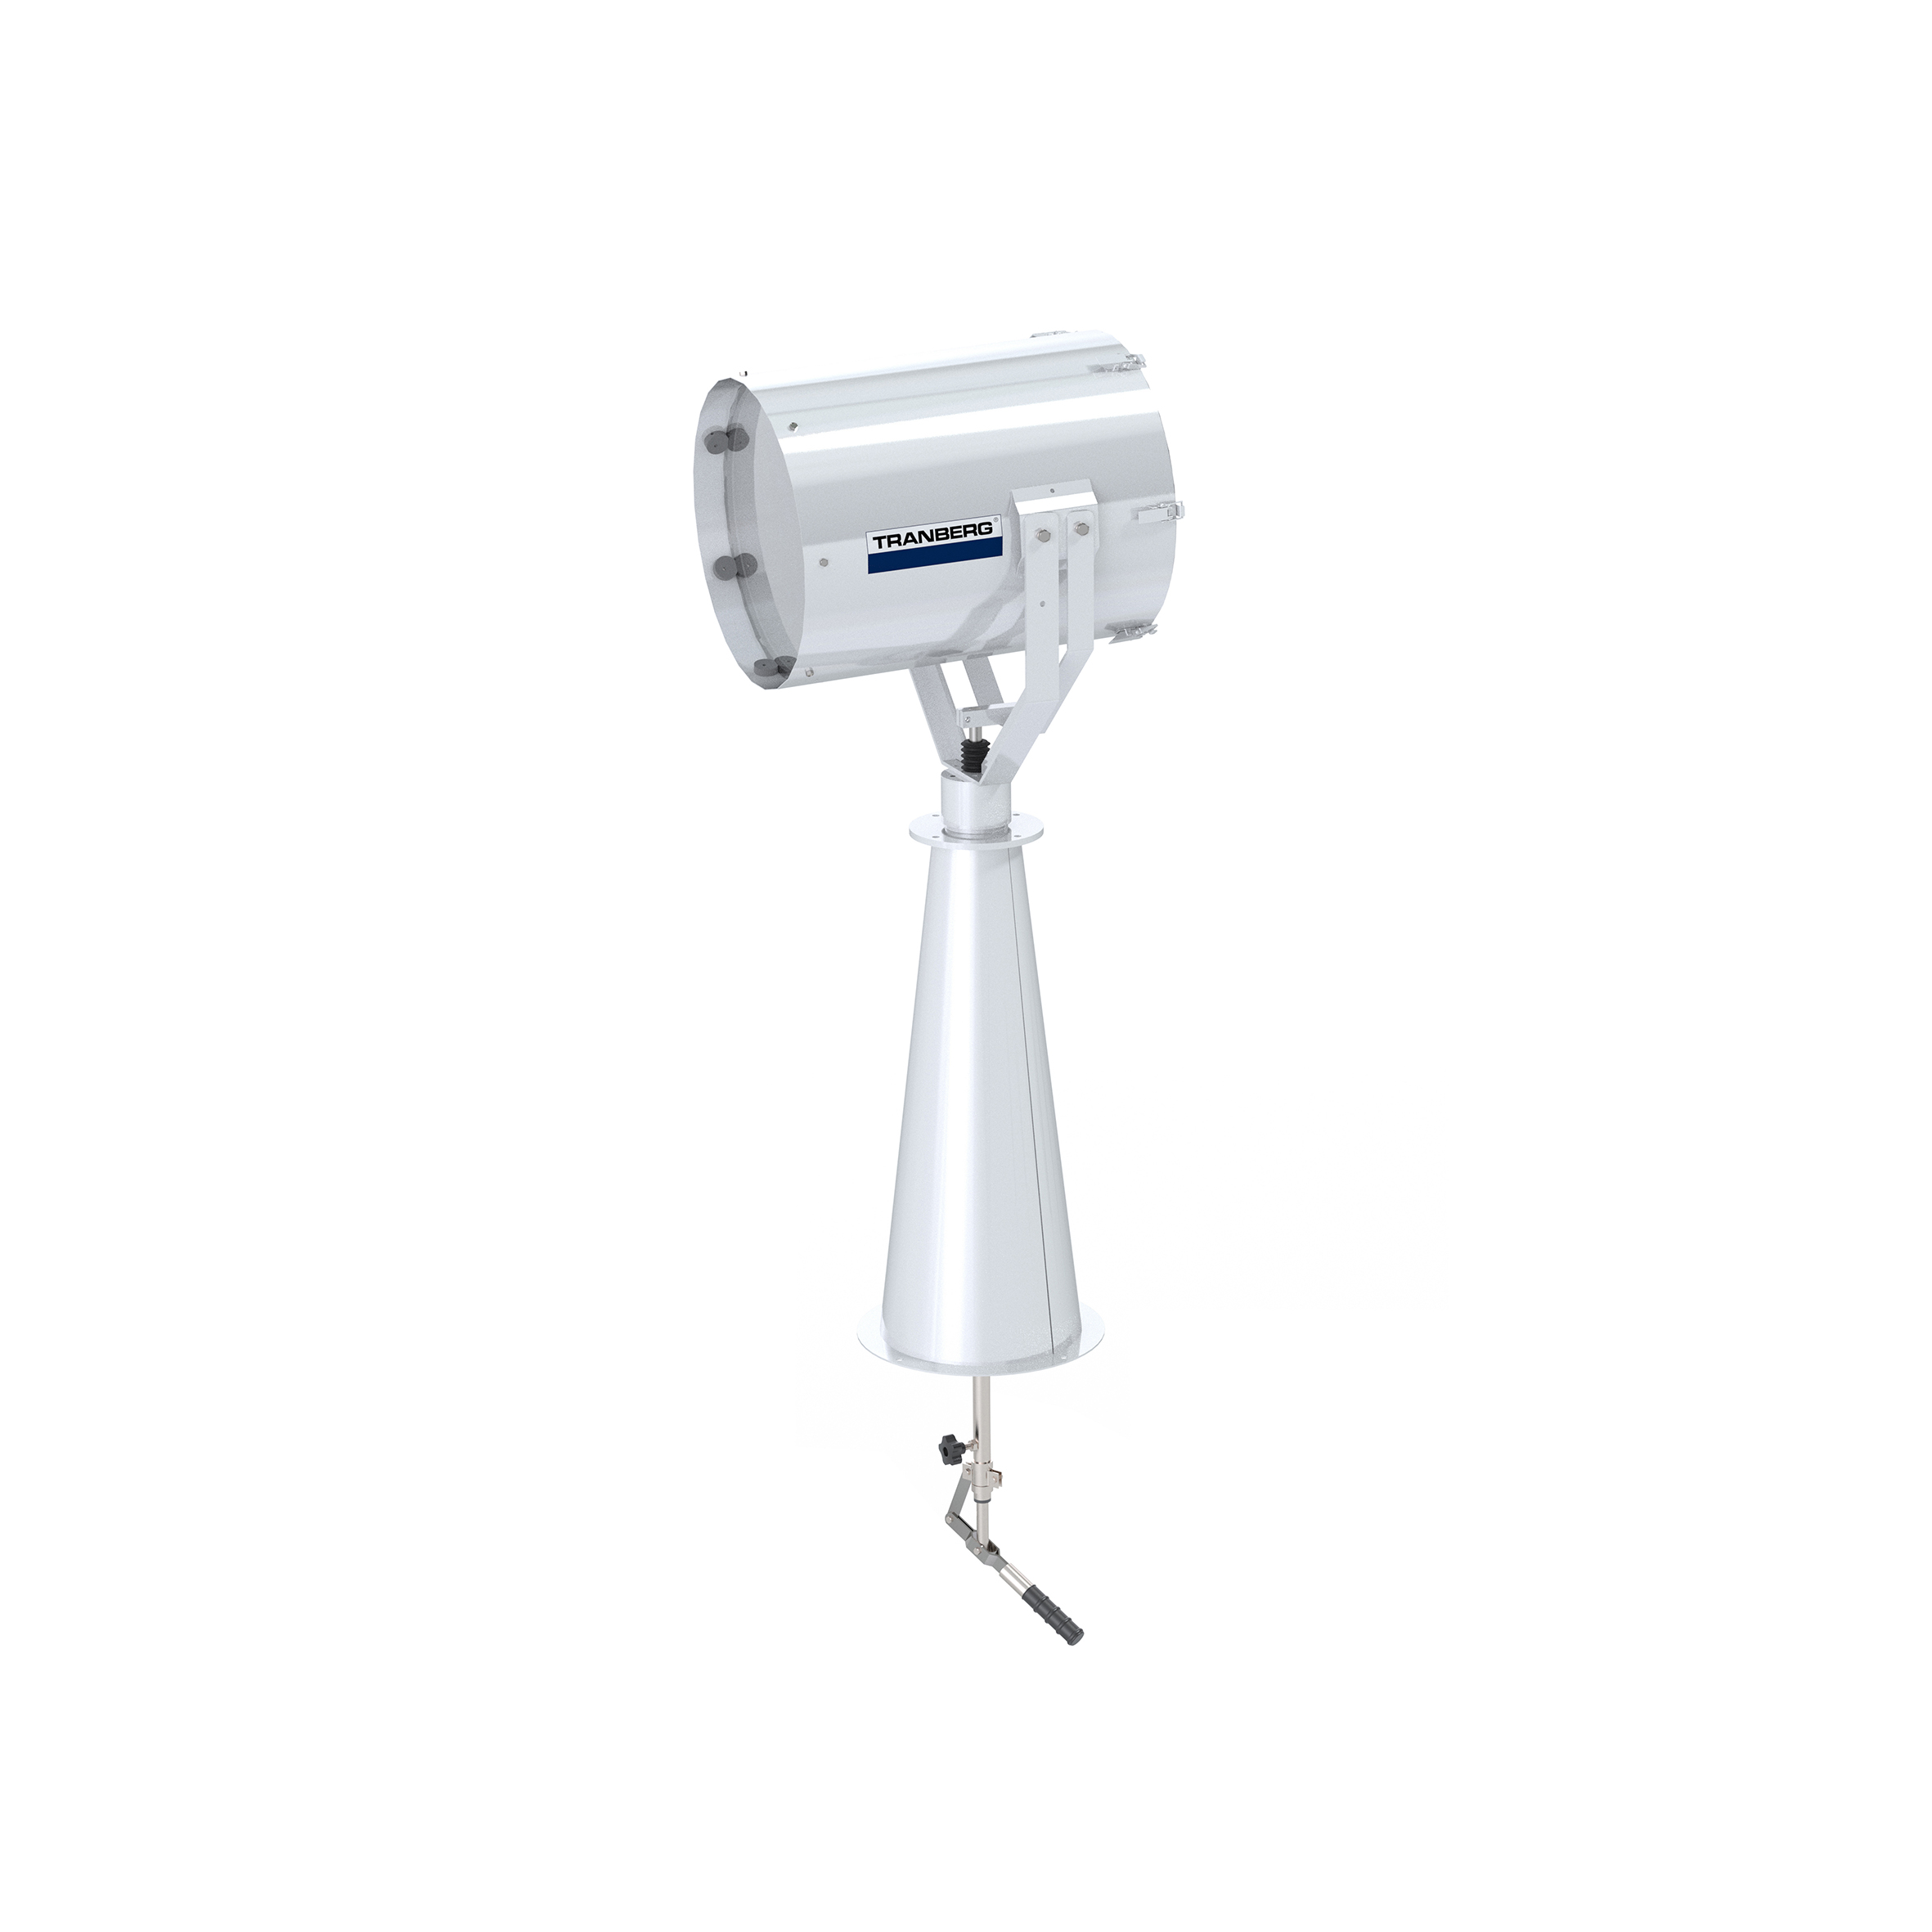 TEF 2630 Searchlight: Halogen 2000W bulb incl, 230V, Bridge Controlled, Stainless Steel, W/800 mm pe